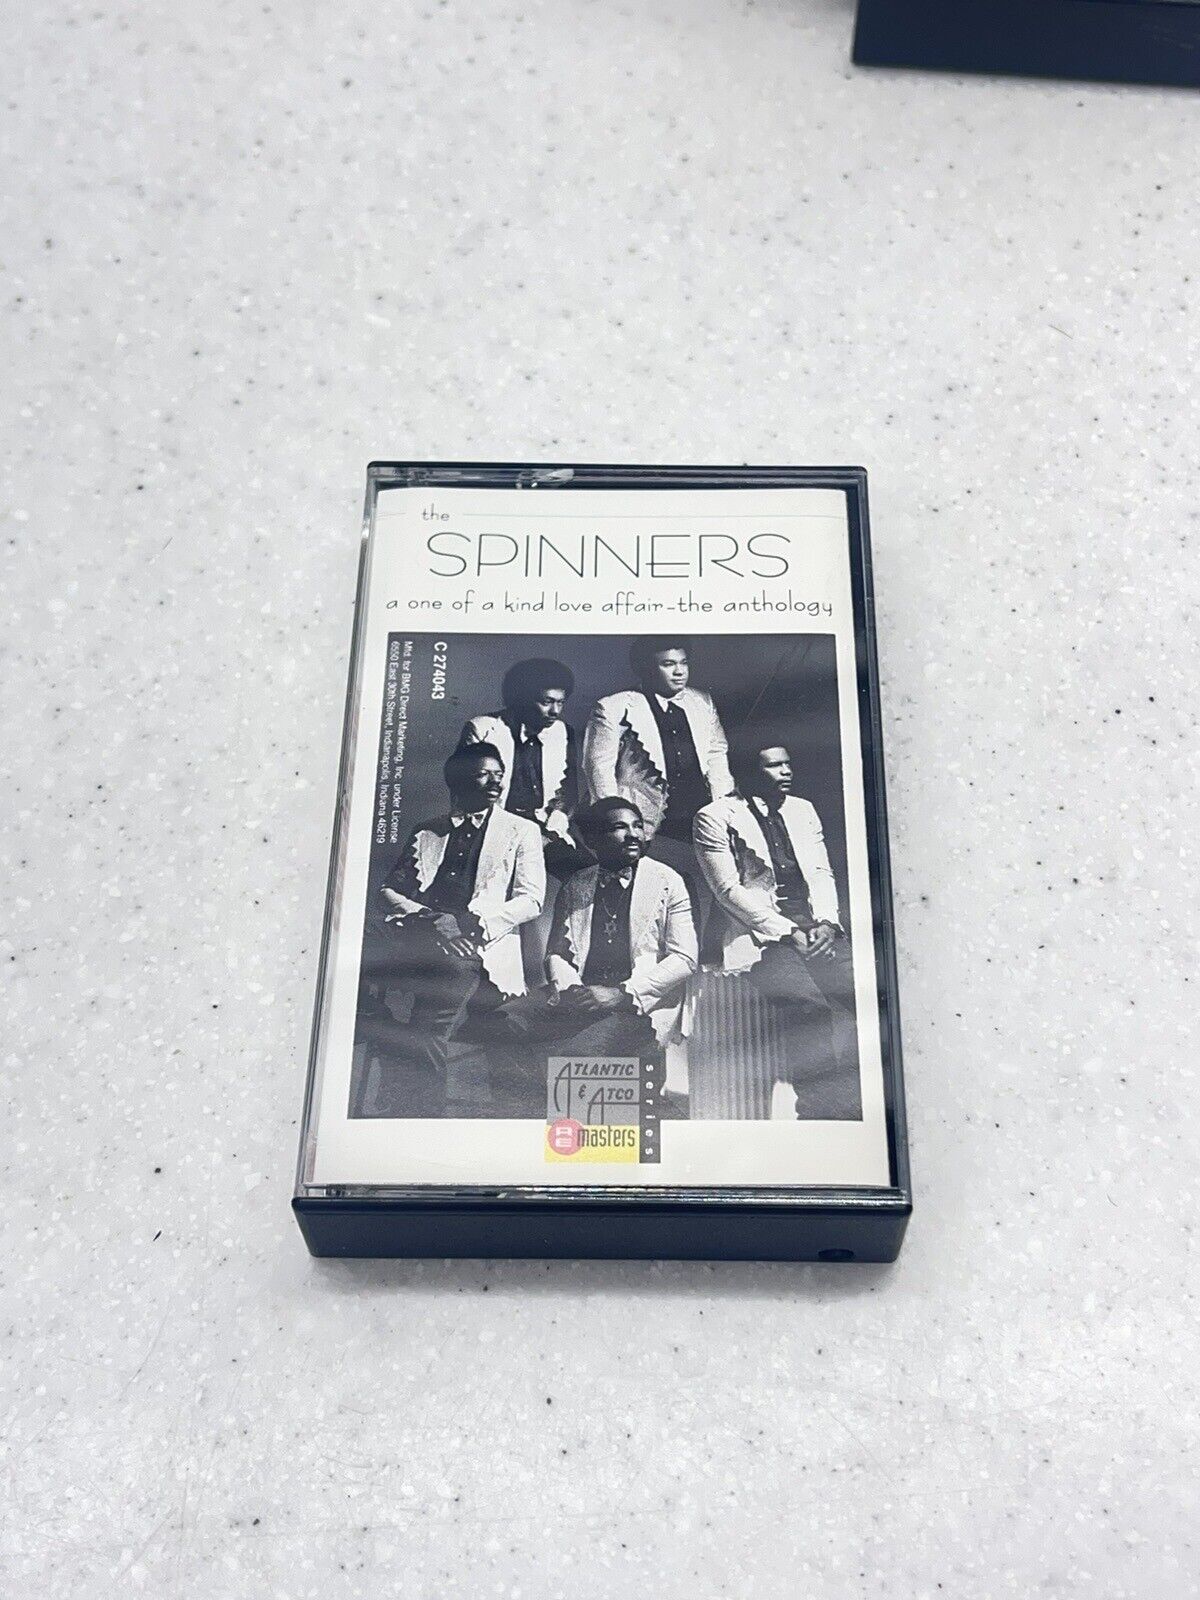 The Spinners A One Of A Kindlove Affair Anthology Cassette Tape #2